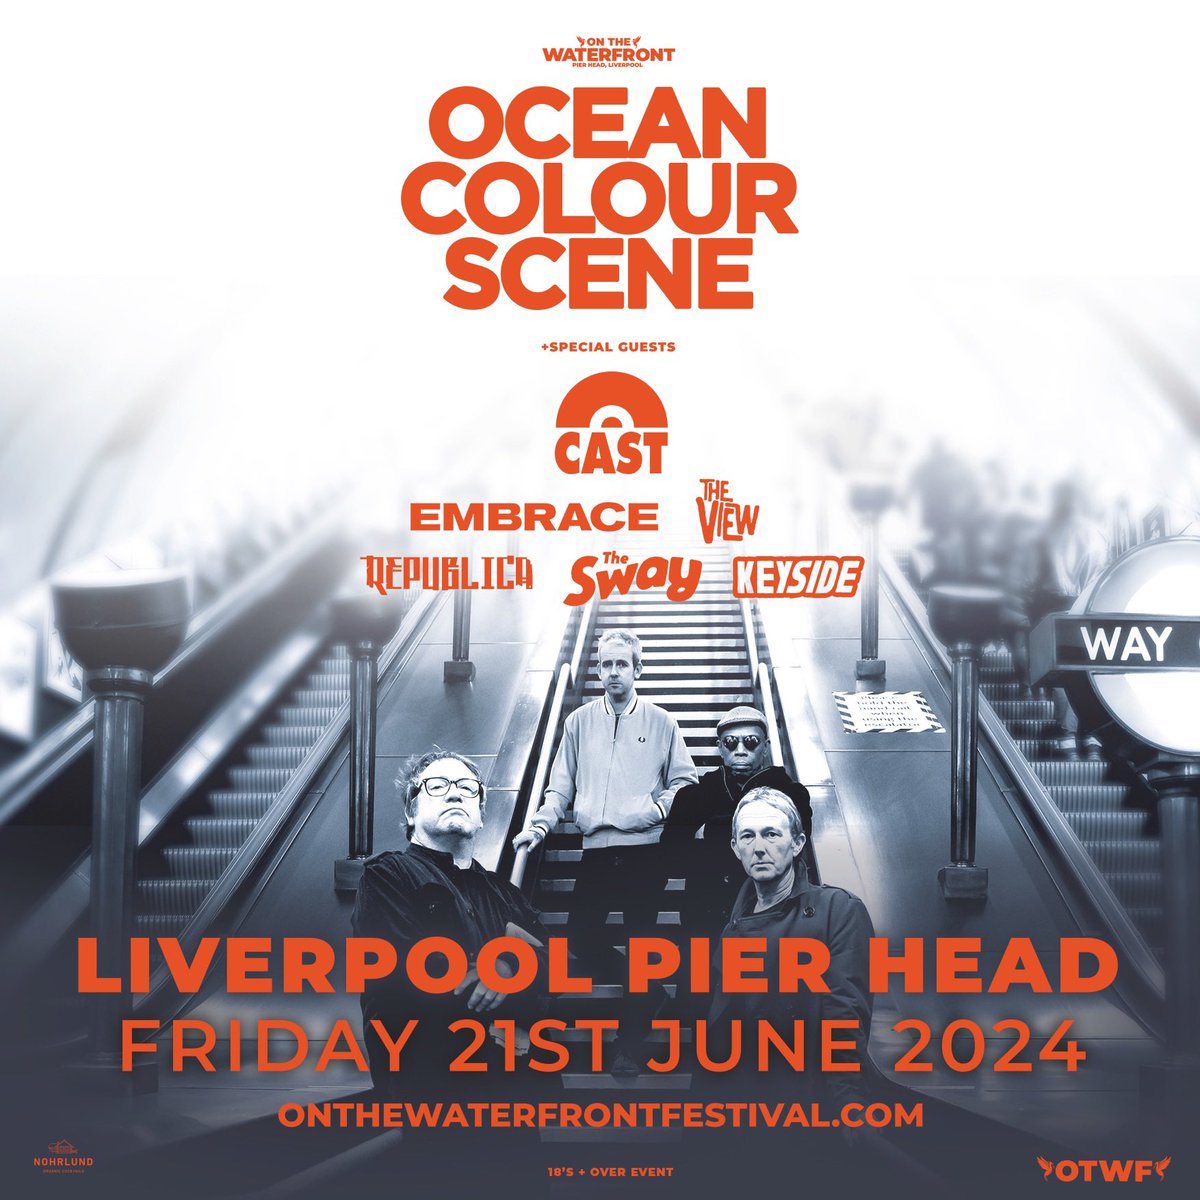 Back with another belter gig on the pier head this summer, on the lineup alongside some massive bands 😎🙌🏻 Link is below to sign up for the presale tickets, then on sale Friday 10am 🎟️: onthewaterfrontfestival.com/ocs?fbclid=PAA…